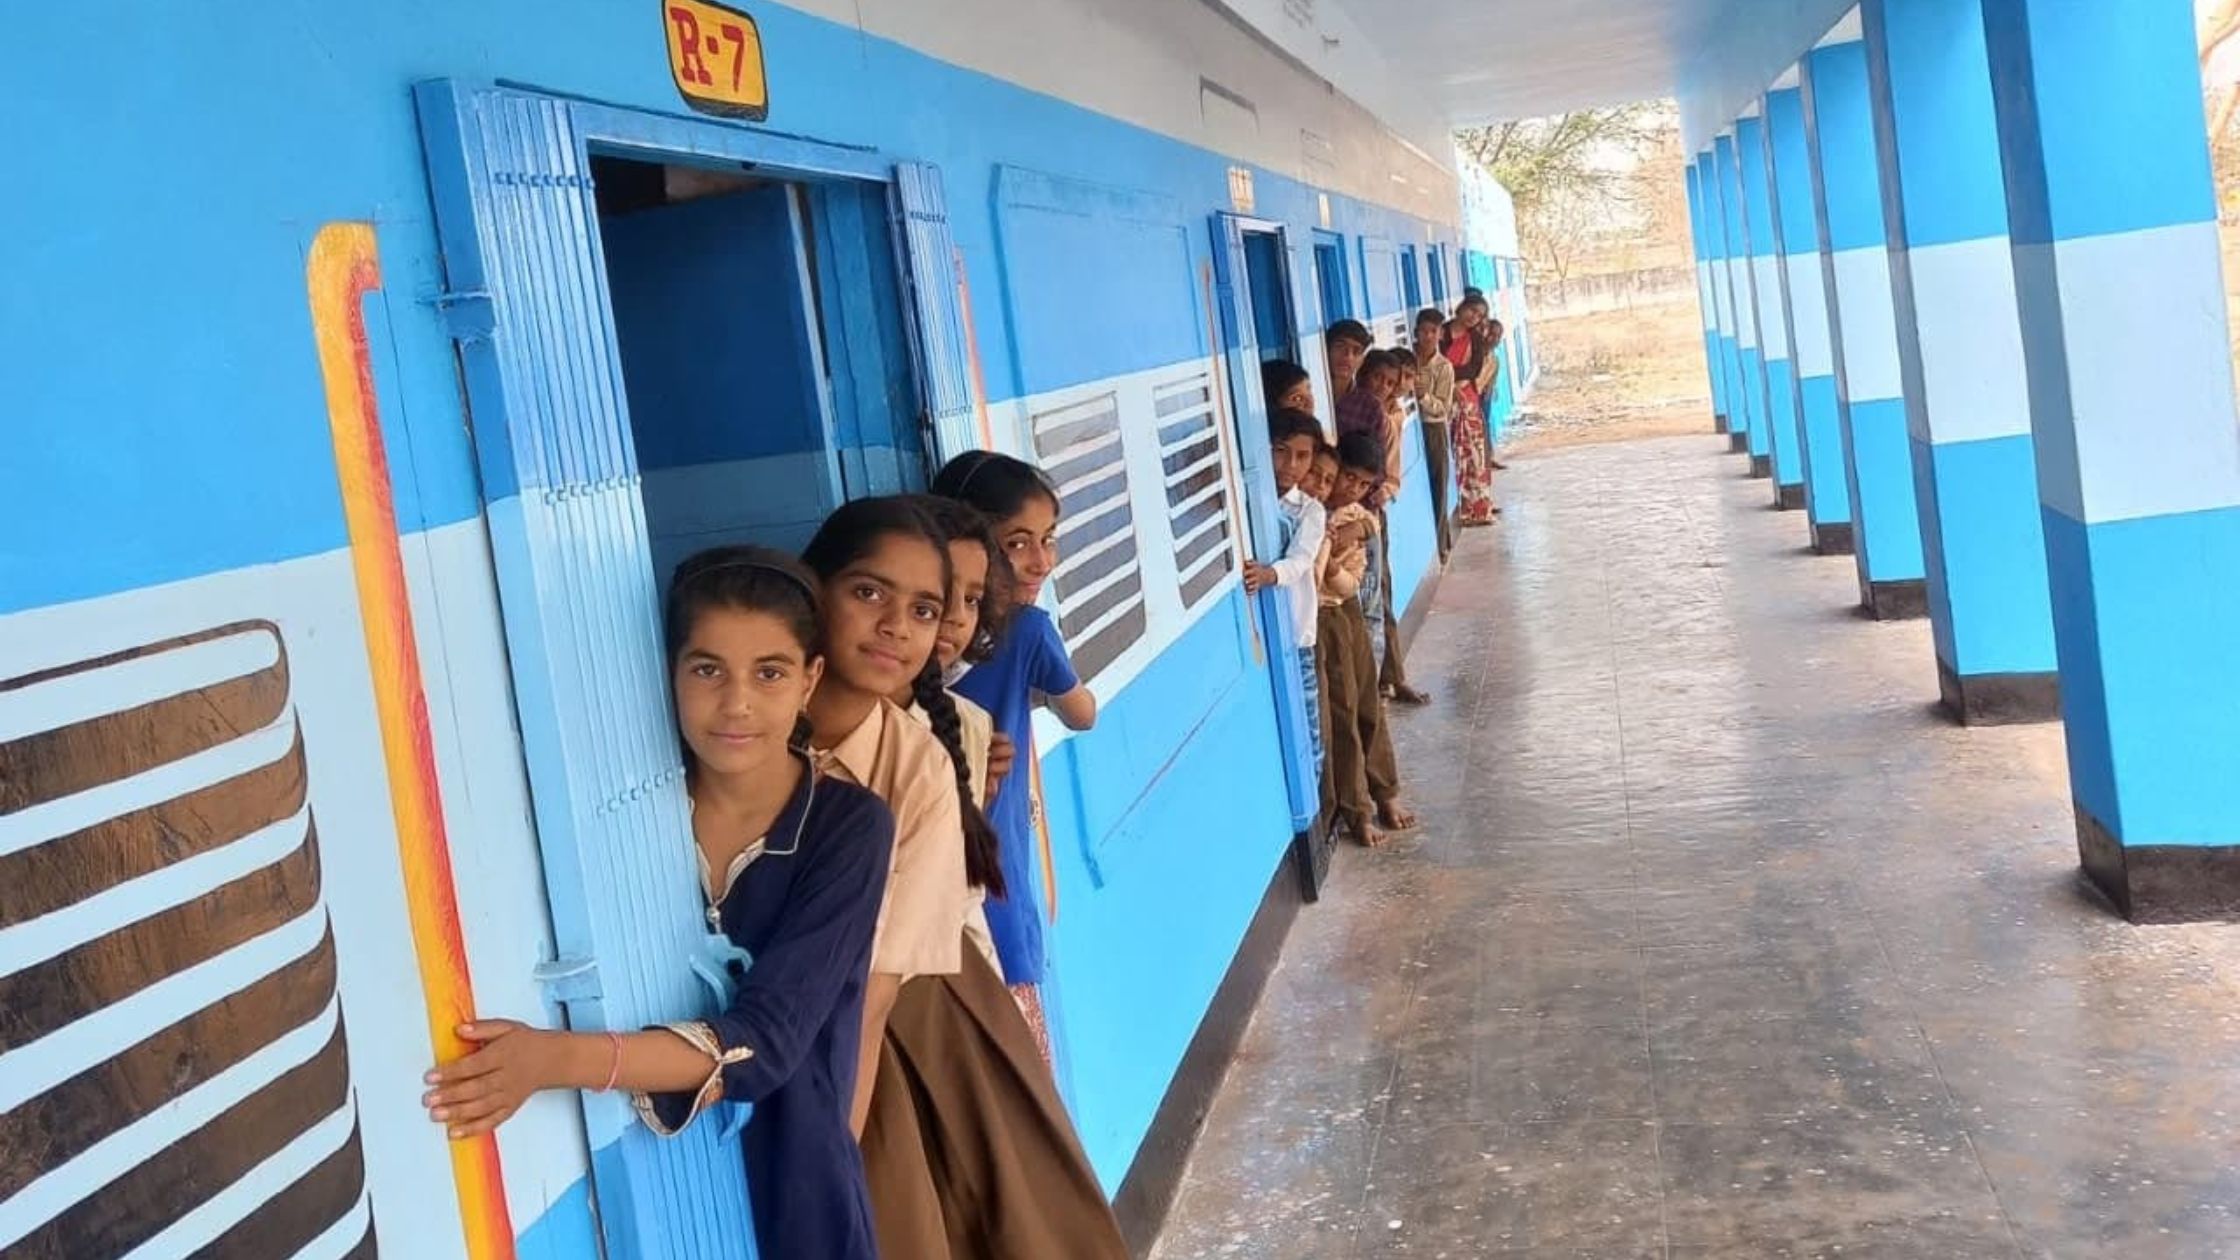 The children of this school have embarked on the journey of the future by boarding the Shiksha Express.